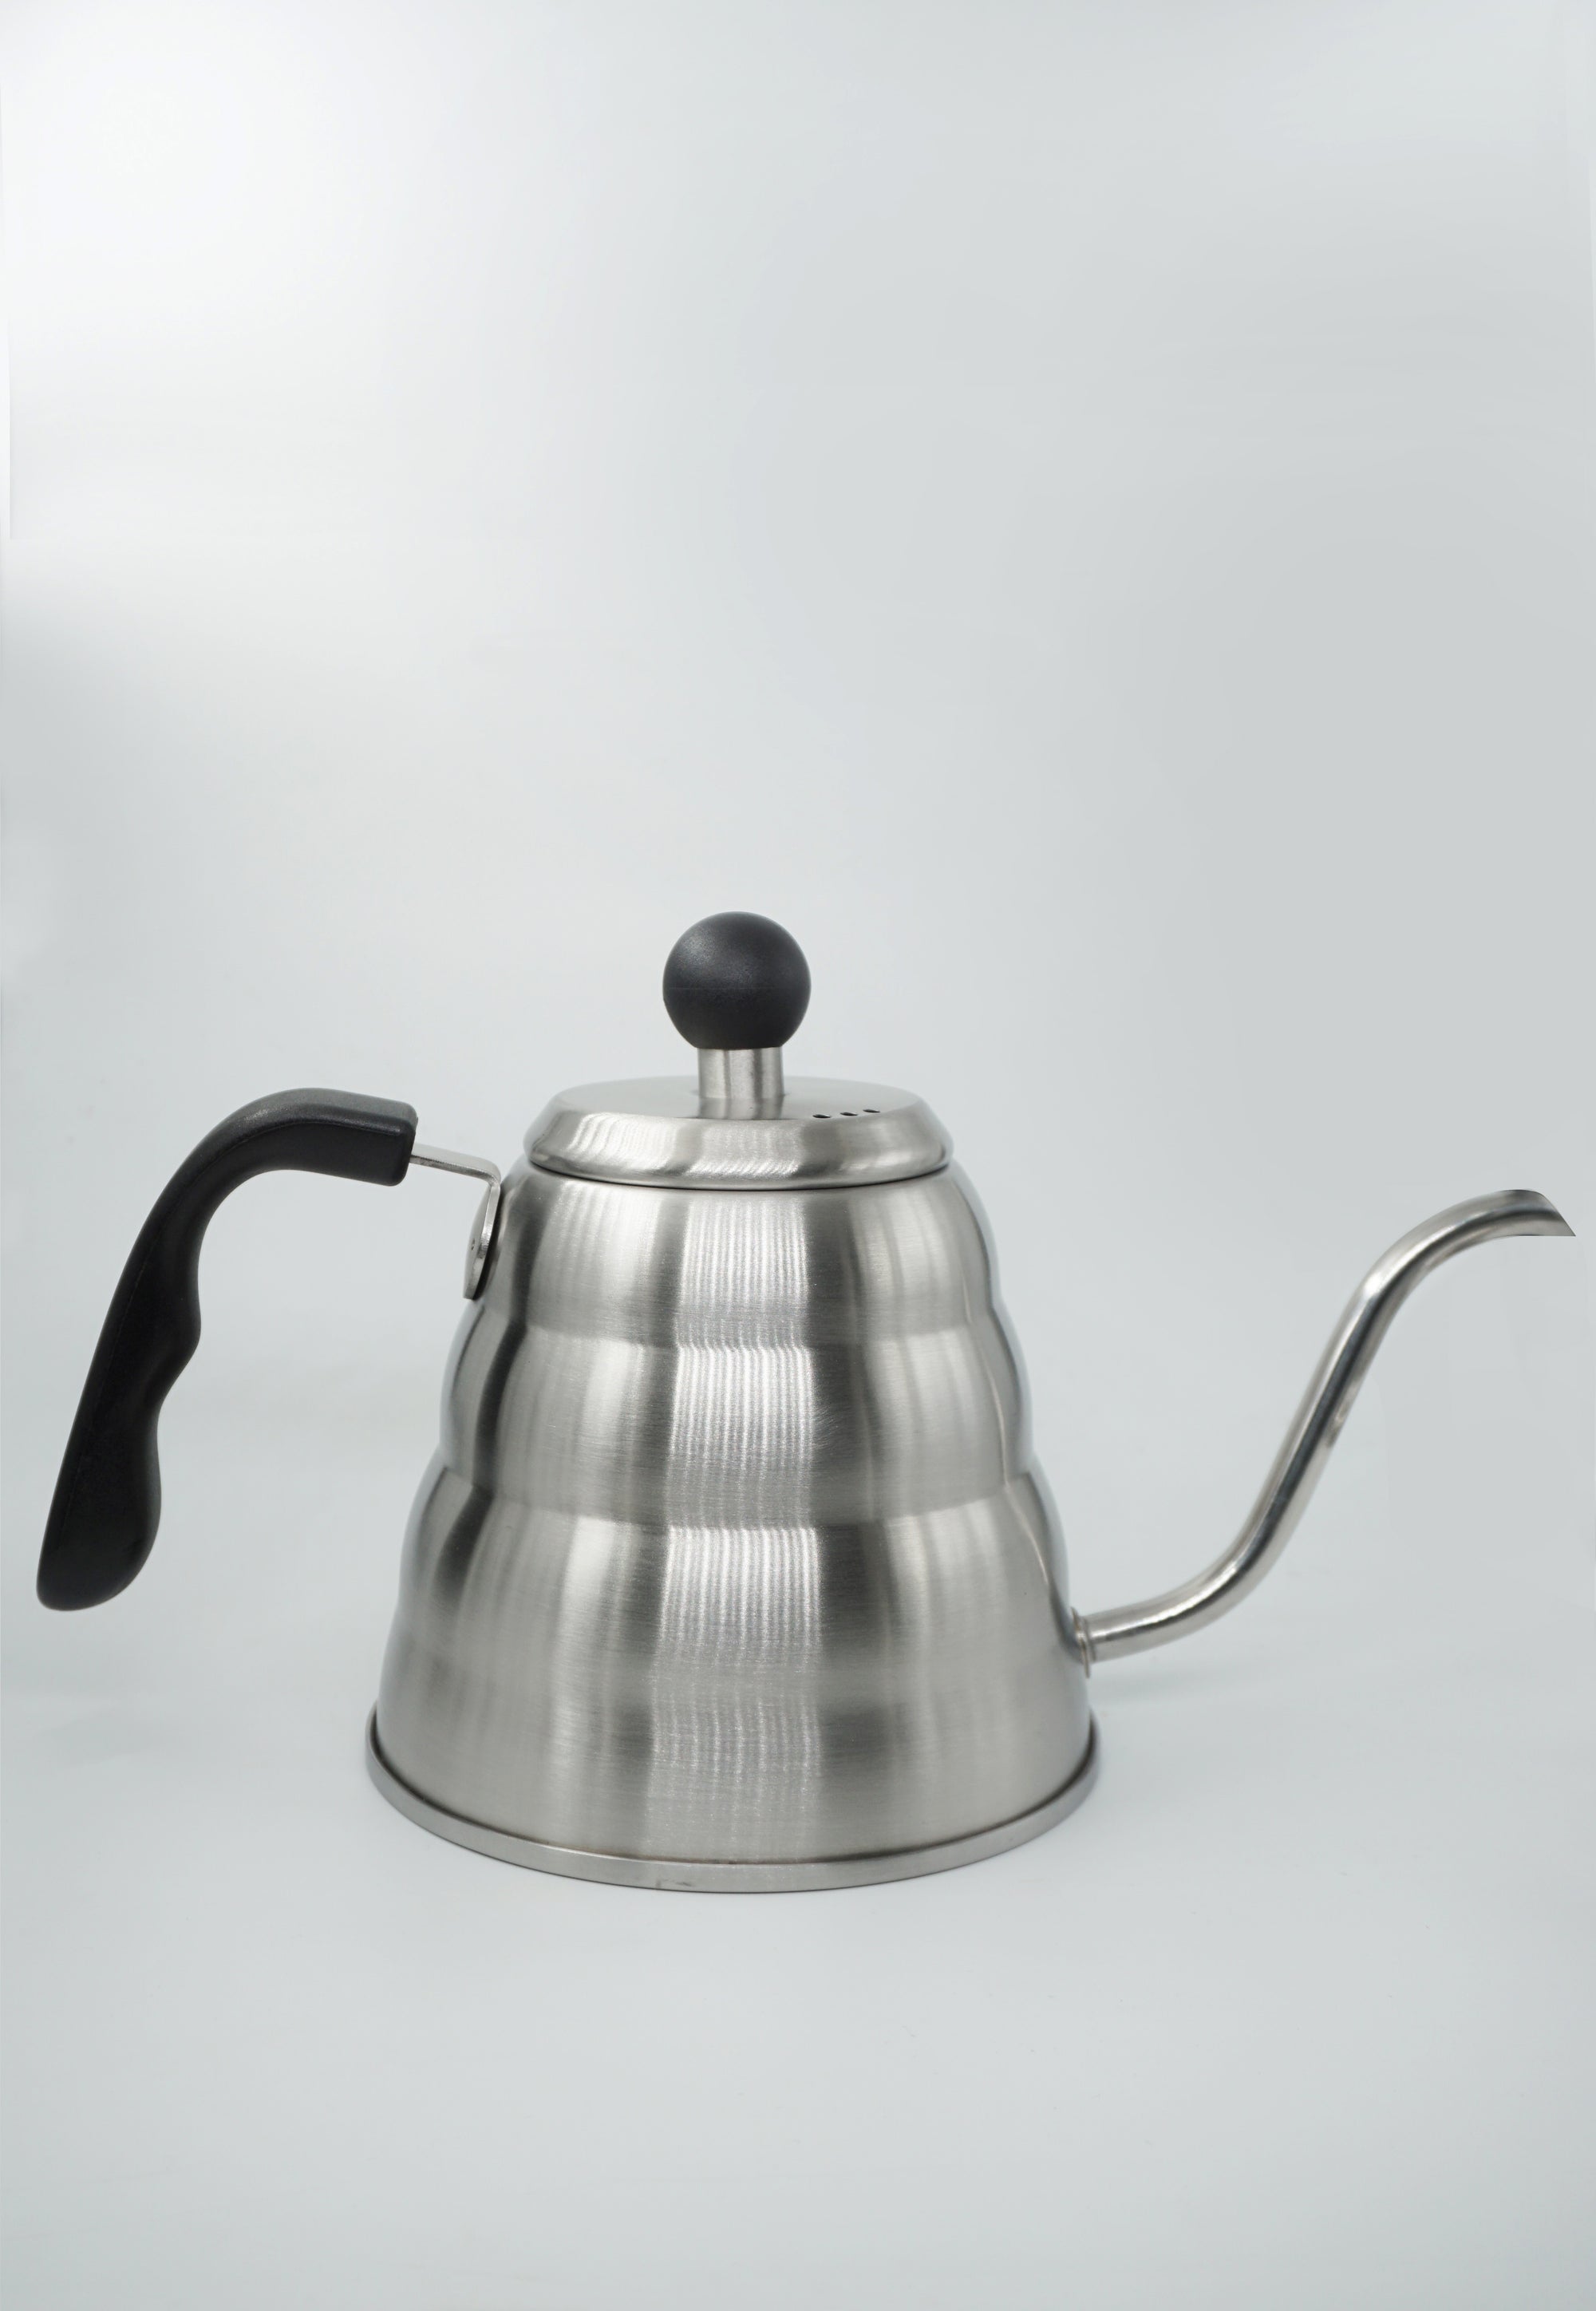 Pour Over Coffee Kettle (1.2 L)